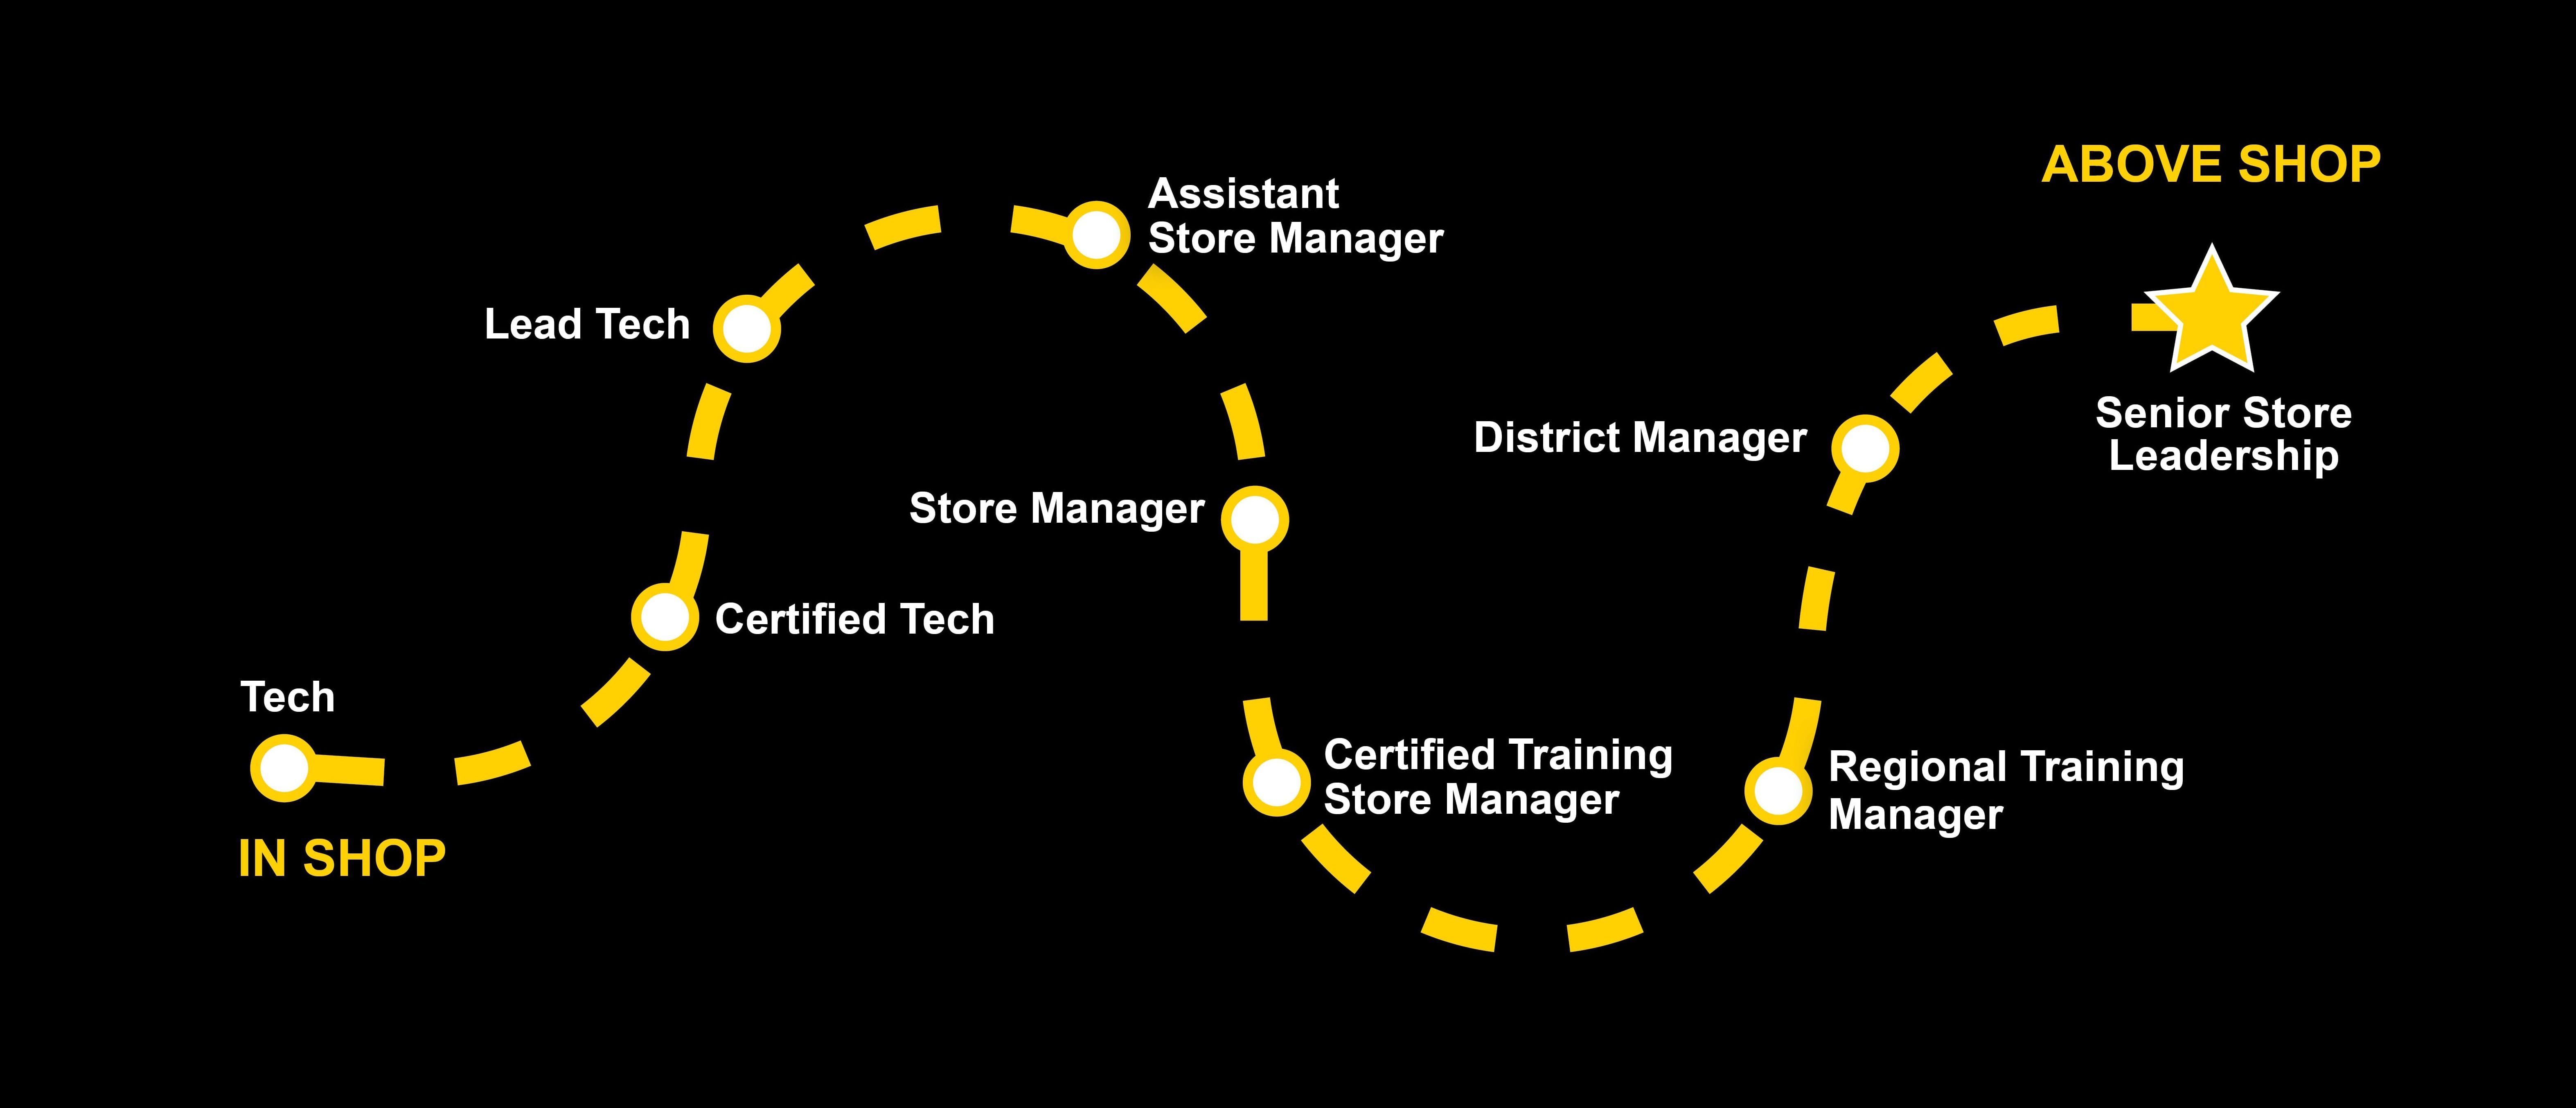 Roadmap from Tech to Senior Store Leadership